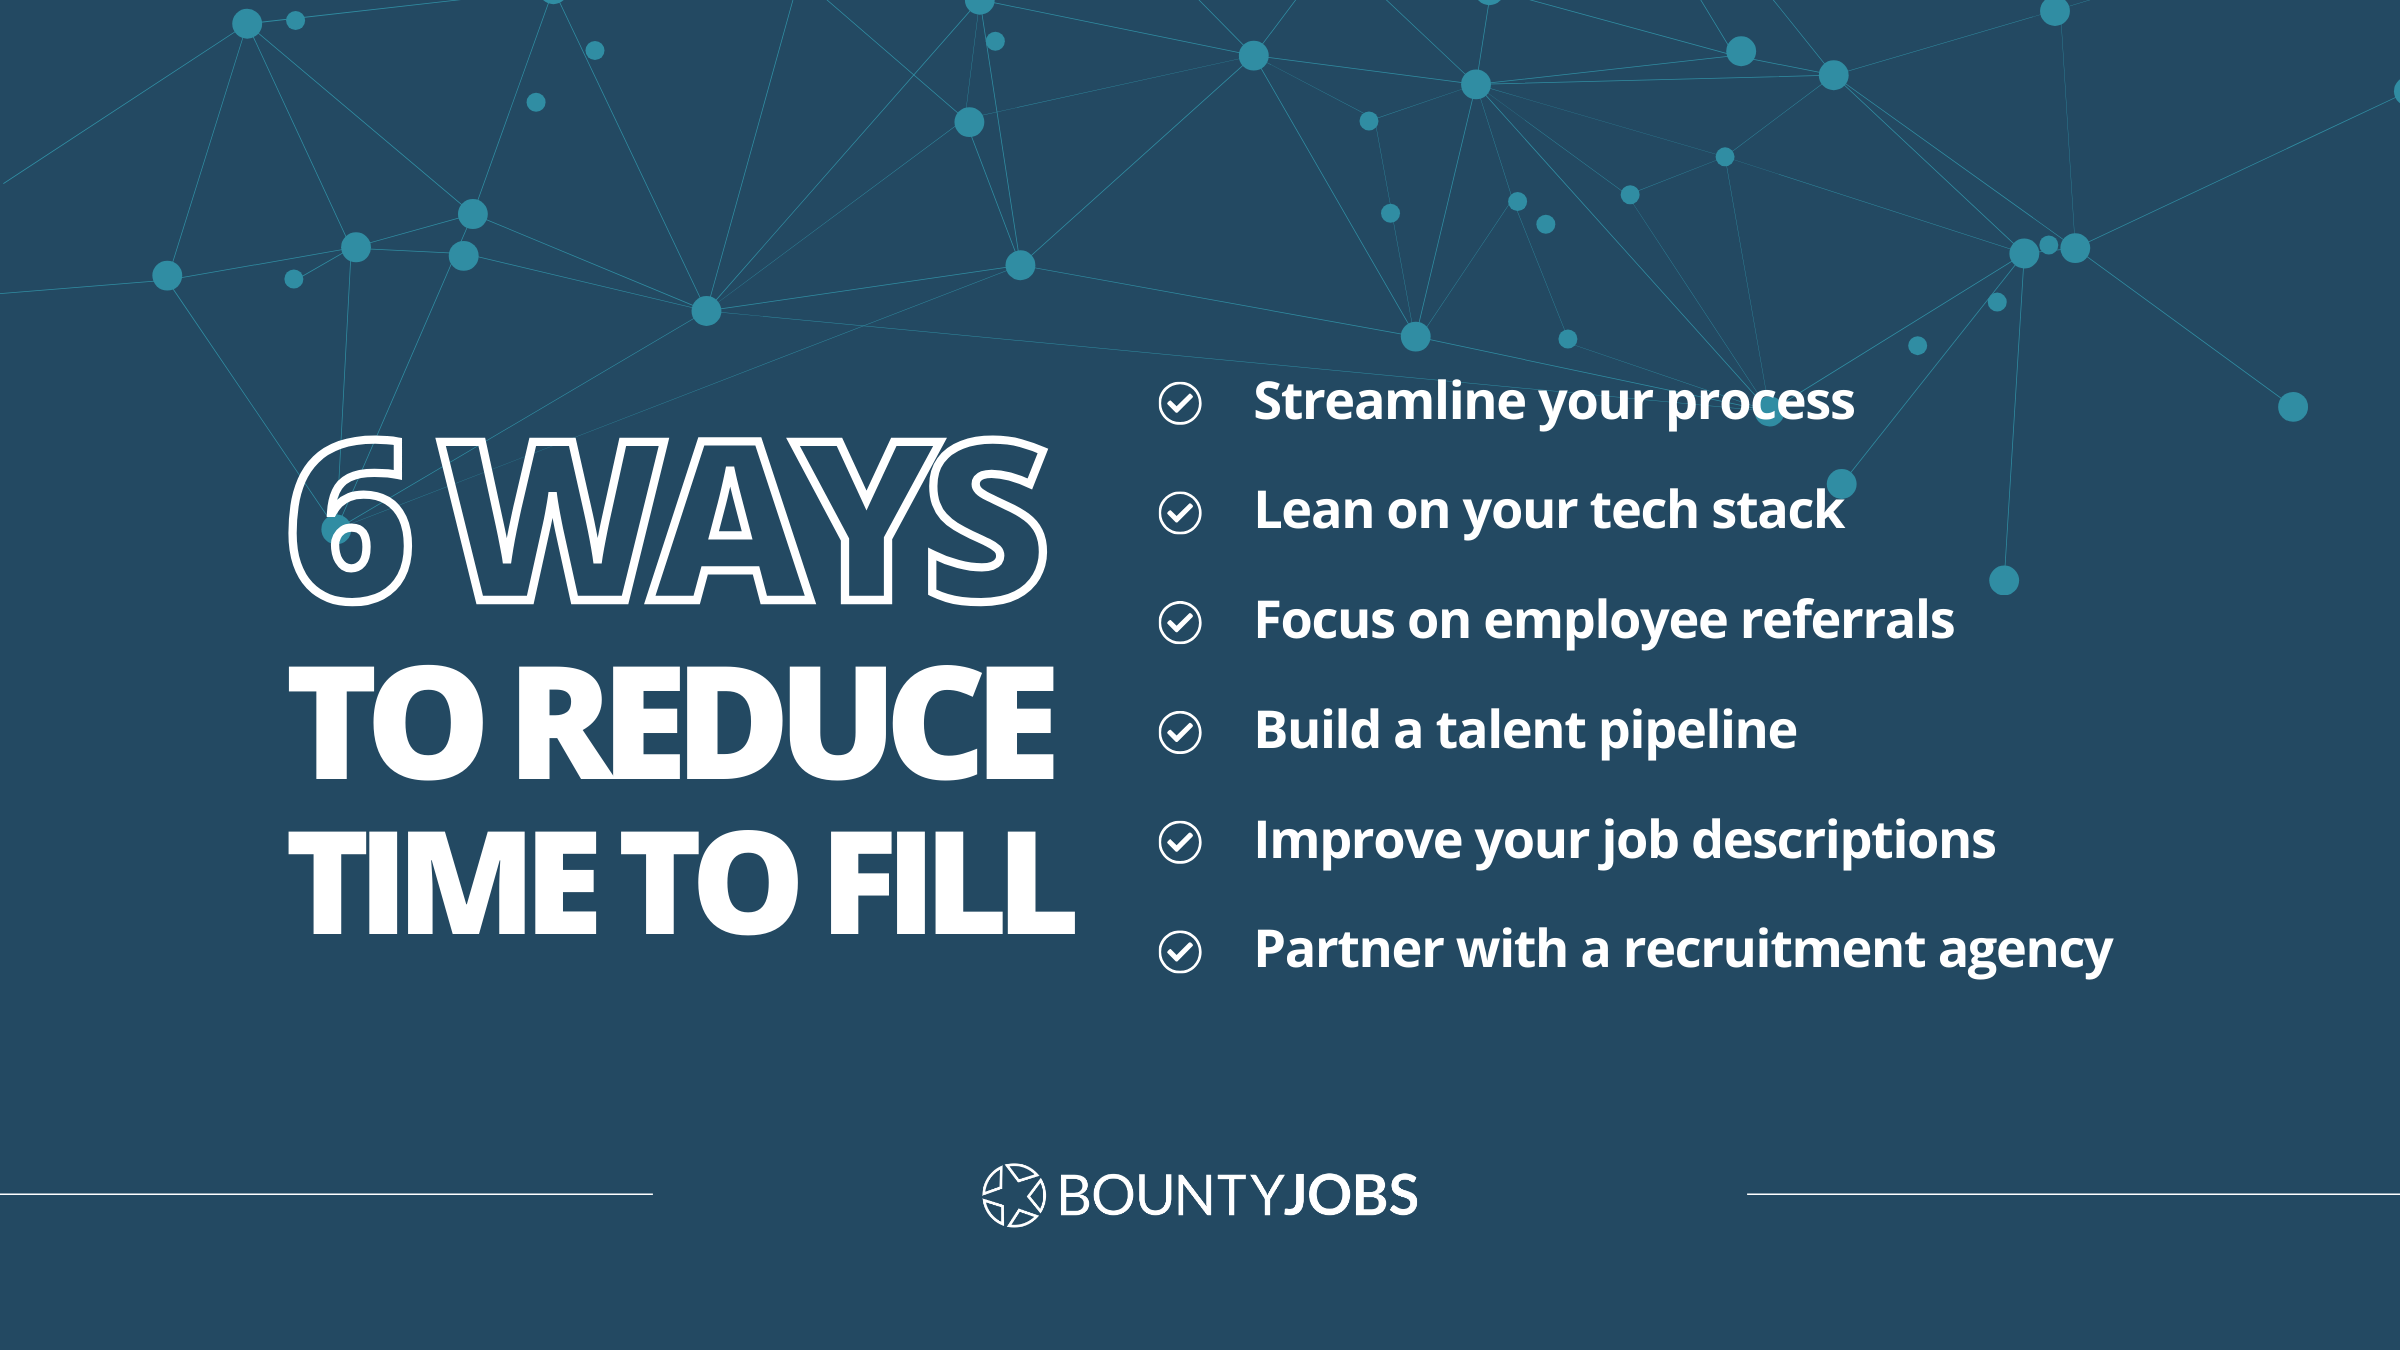 6 ways to reduce time to fill